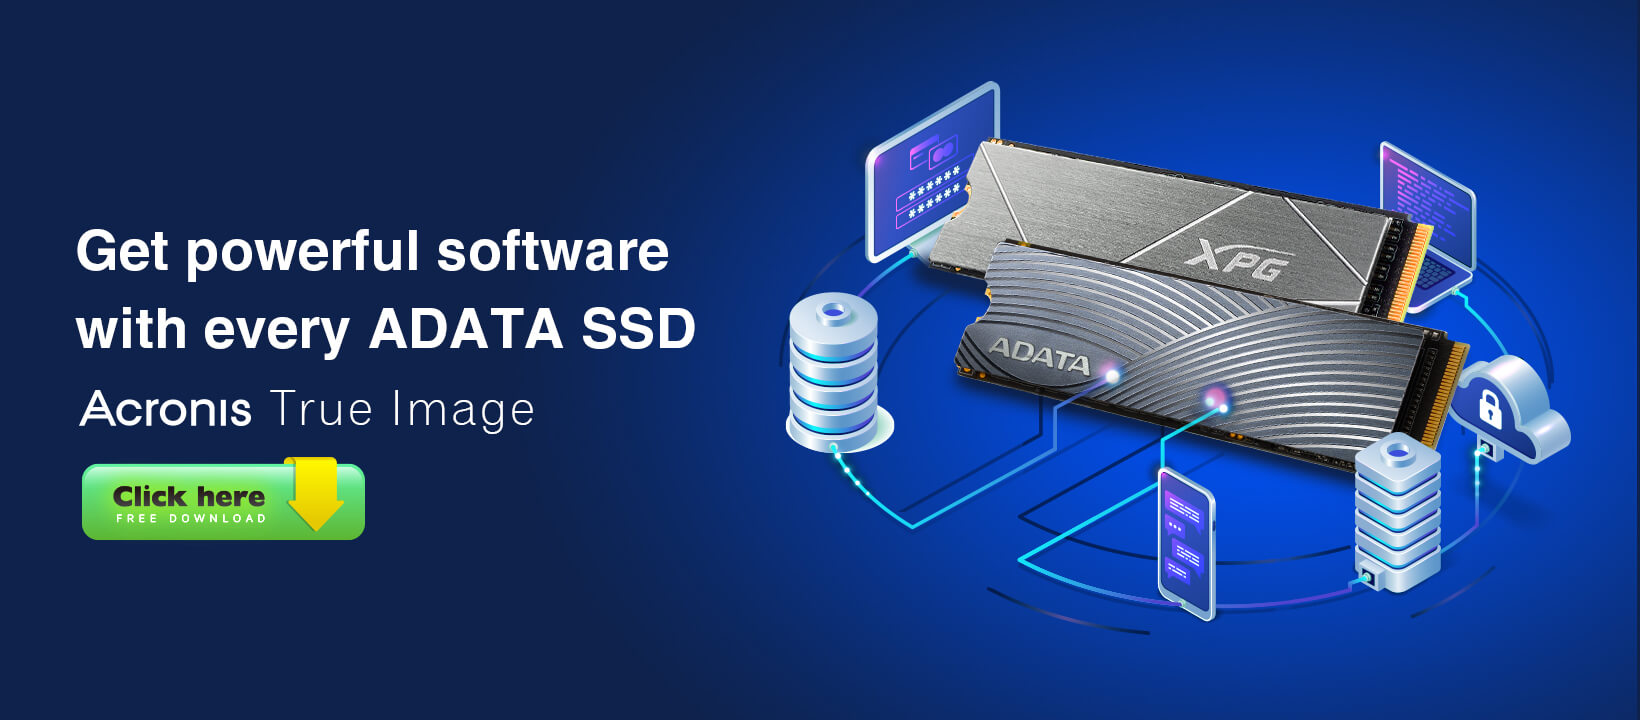 ADATA Get powerful software with every ADATA SSD